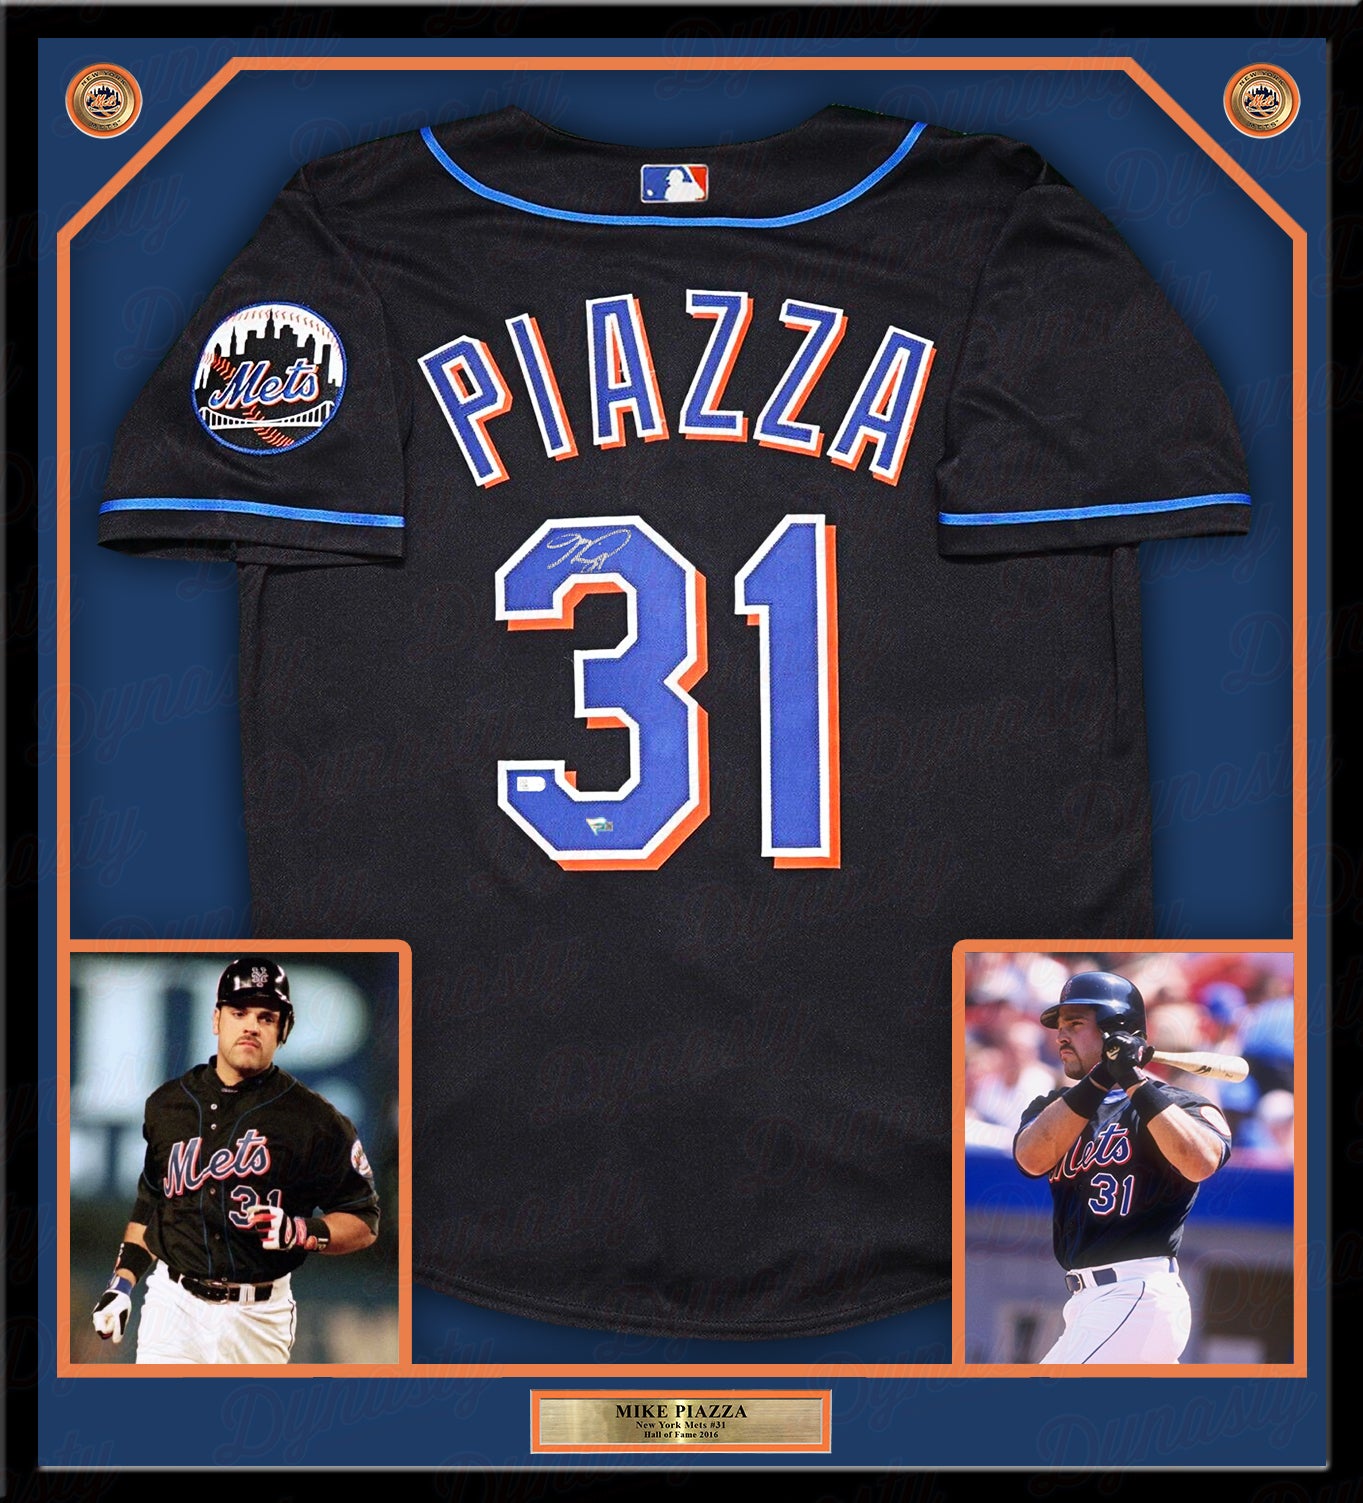 Mike Piazza New York Mets Autographed Black Mitchell and Ness Framed Batting Practice Replica Jersey - Dynasty Sports & Framing 